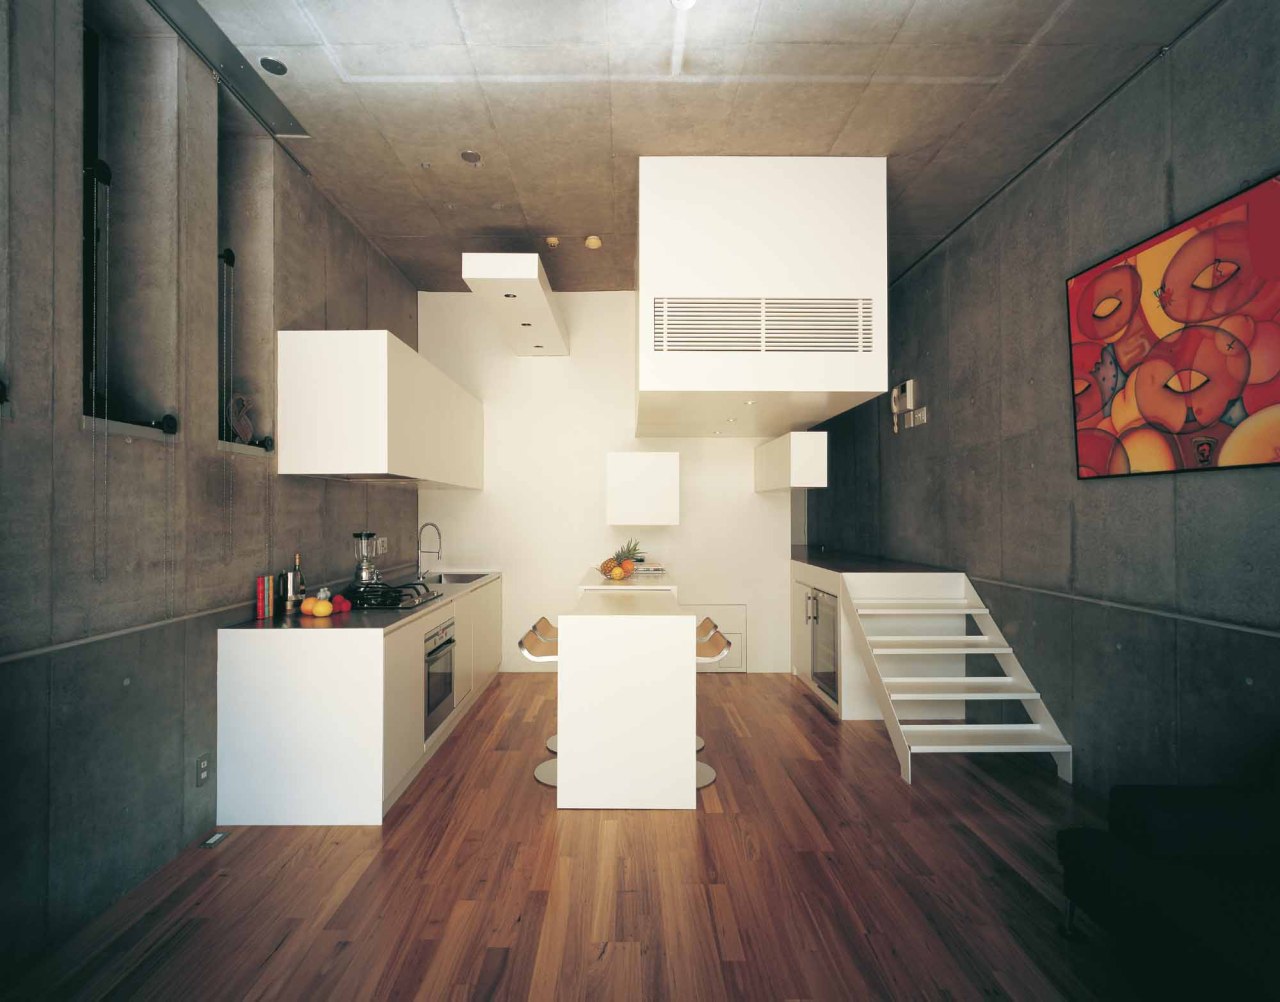 enochliew:  Room 101 by Studio Siri Zanelli The sculptural space was the result of